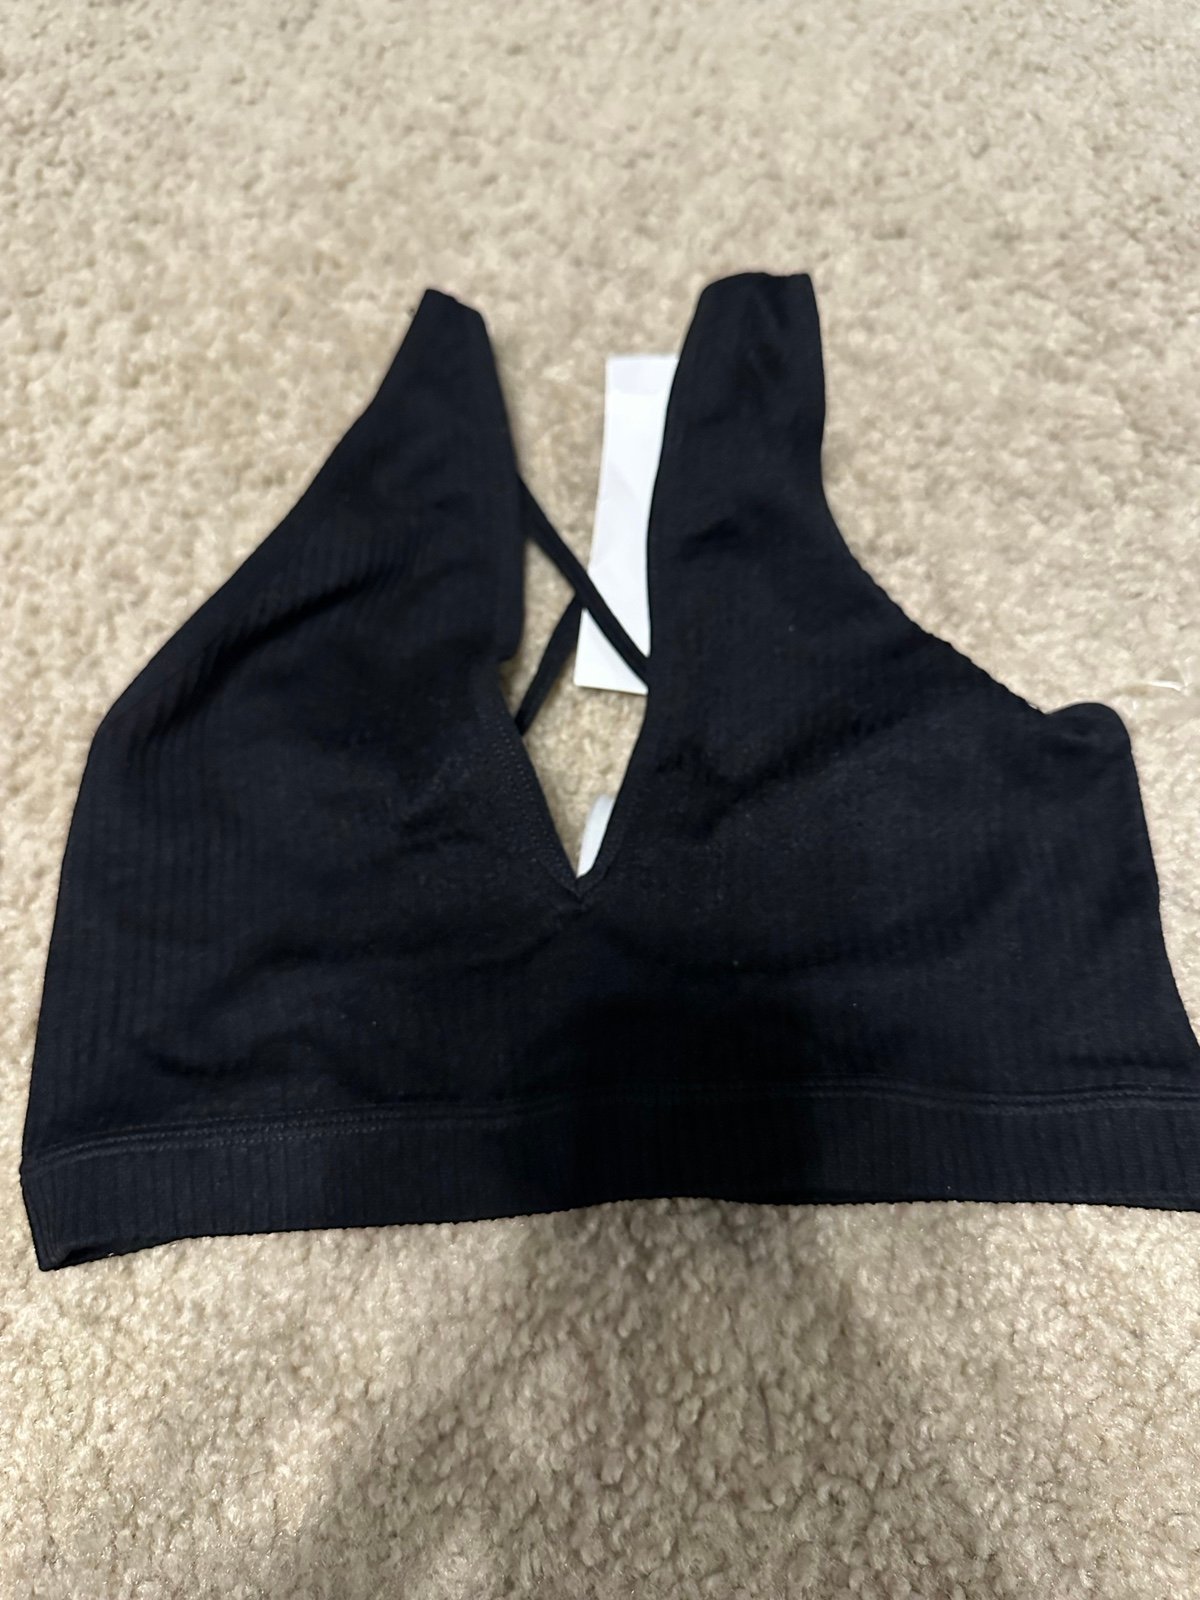 large selection Black cross cami tank top size small nw